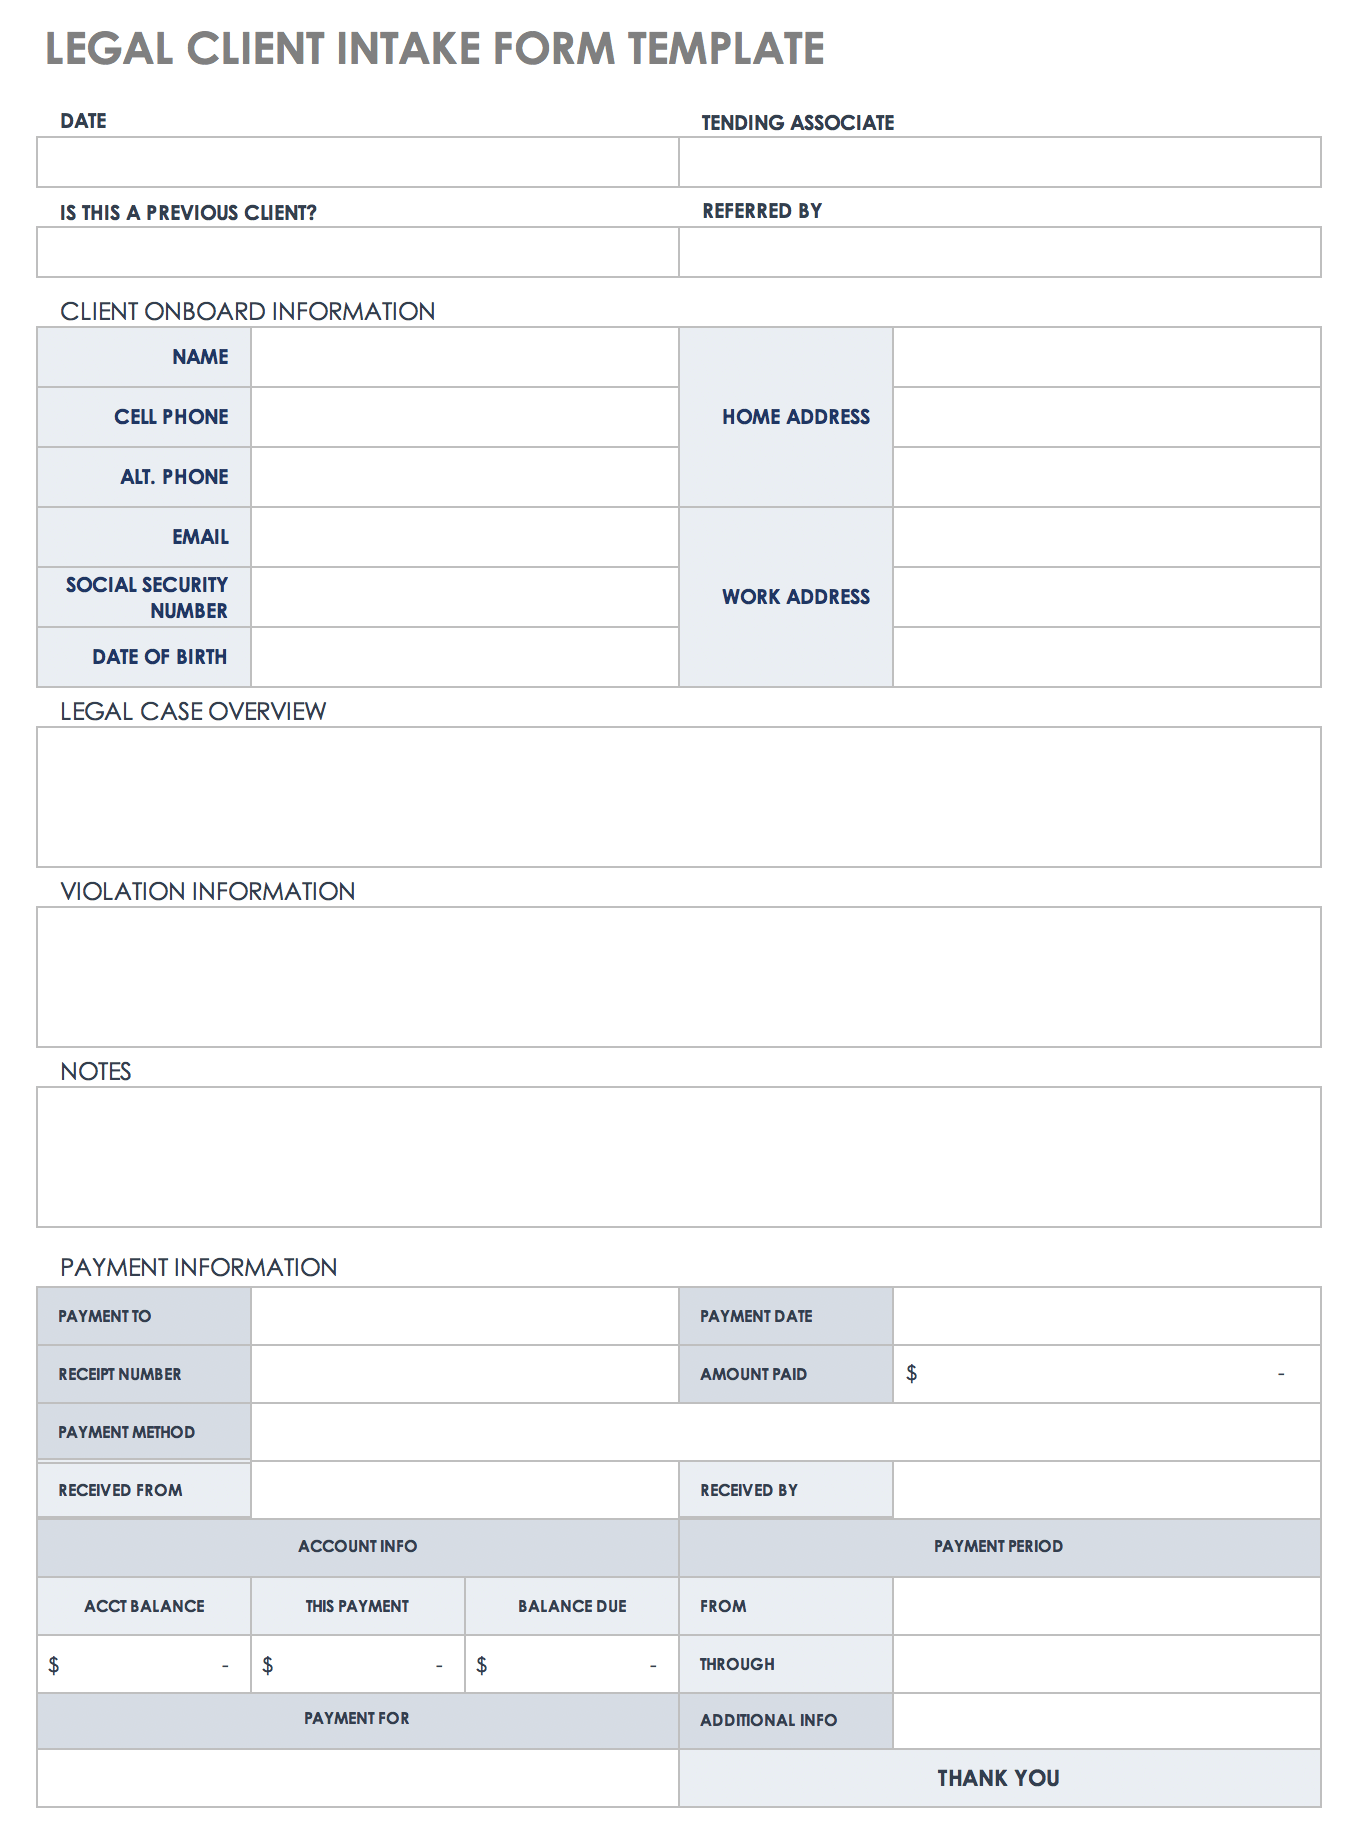 Client Intake Form Template Sample Riset